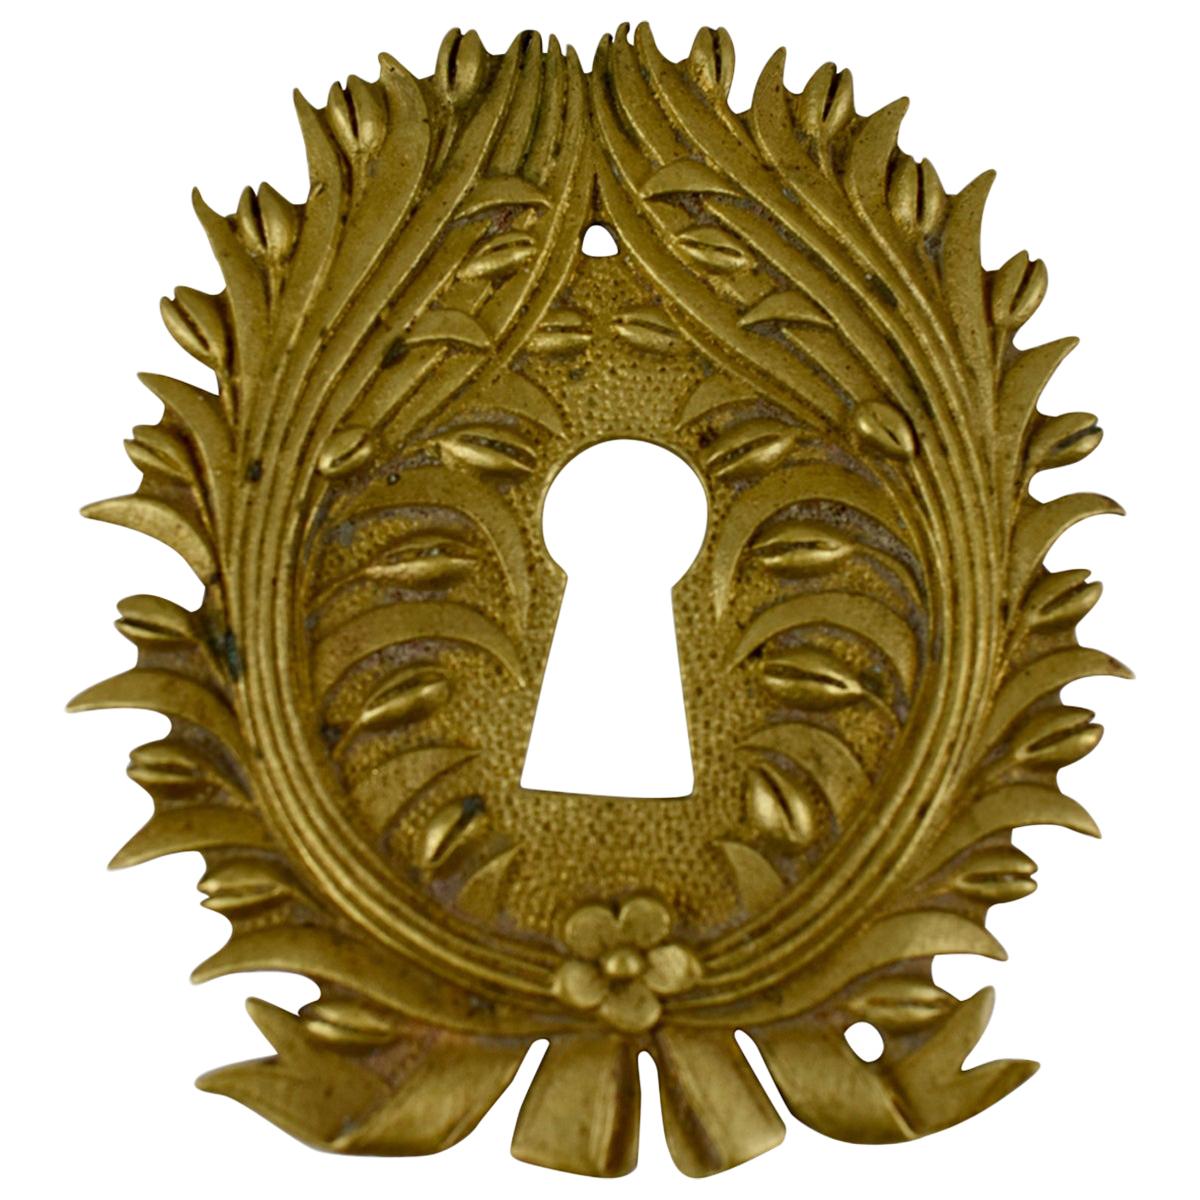 French Beaux Arts Decor Ormolu Wreath and Floral Escutcheon Keyhole Cover For Sale